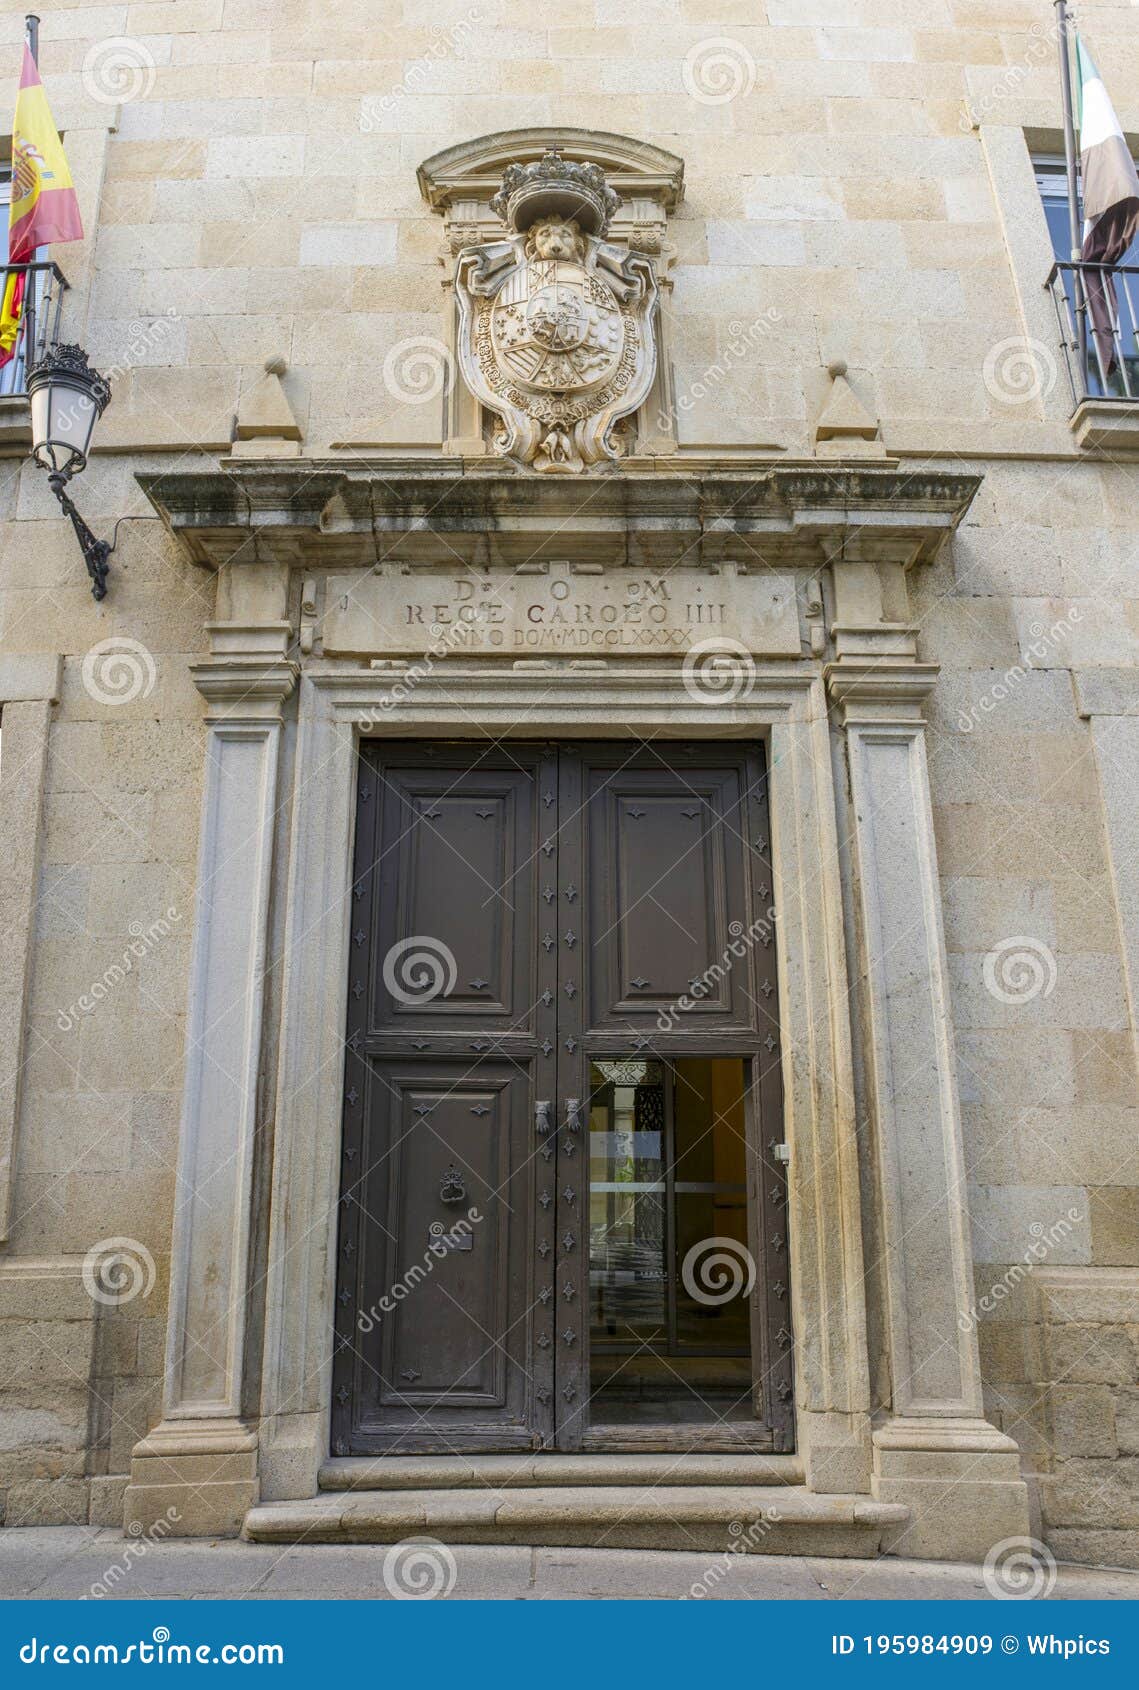 superior court of justice of extremadura, facade, caceres, spain